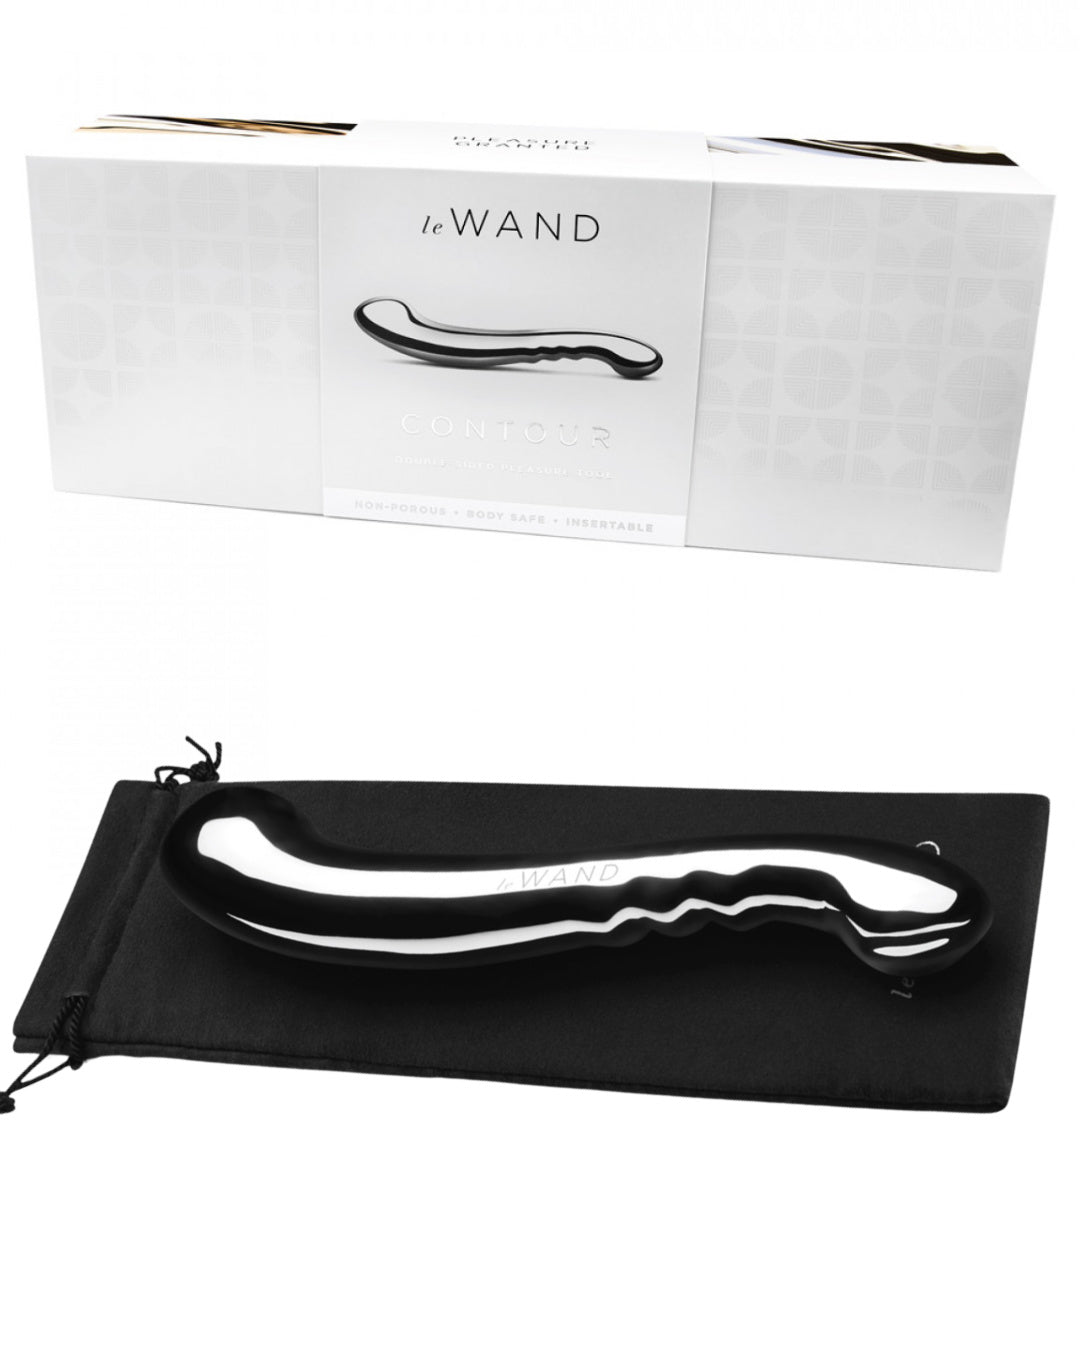 Le Wand Contour Double Ended Stainless Steel Dildo laying on its black storage bag against a white background